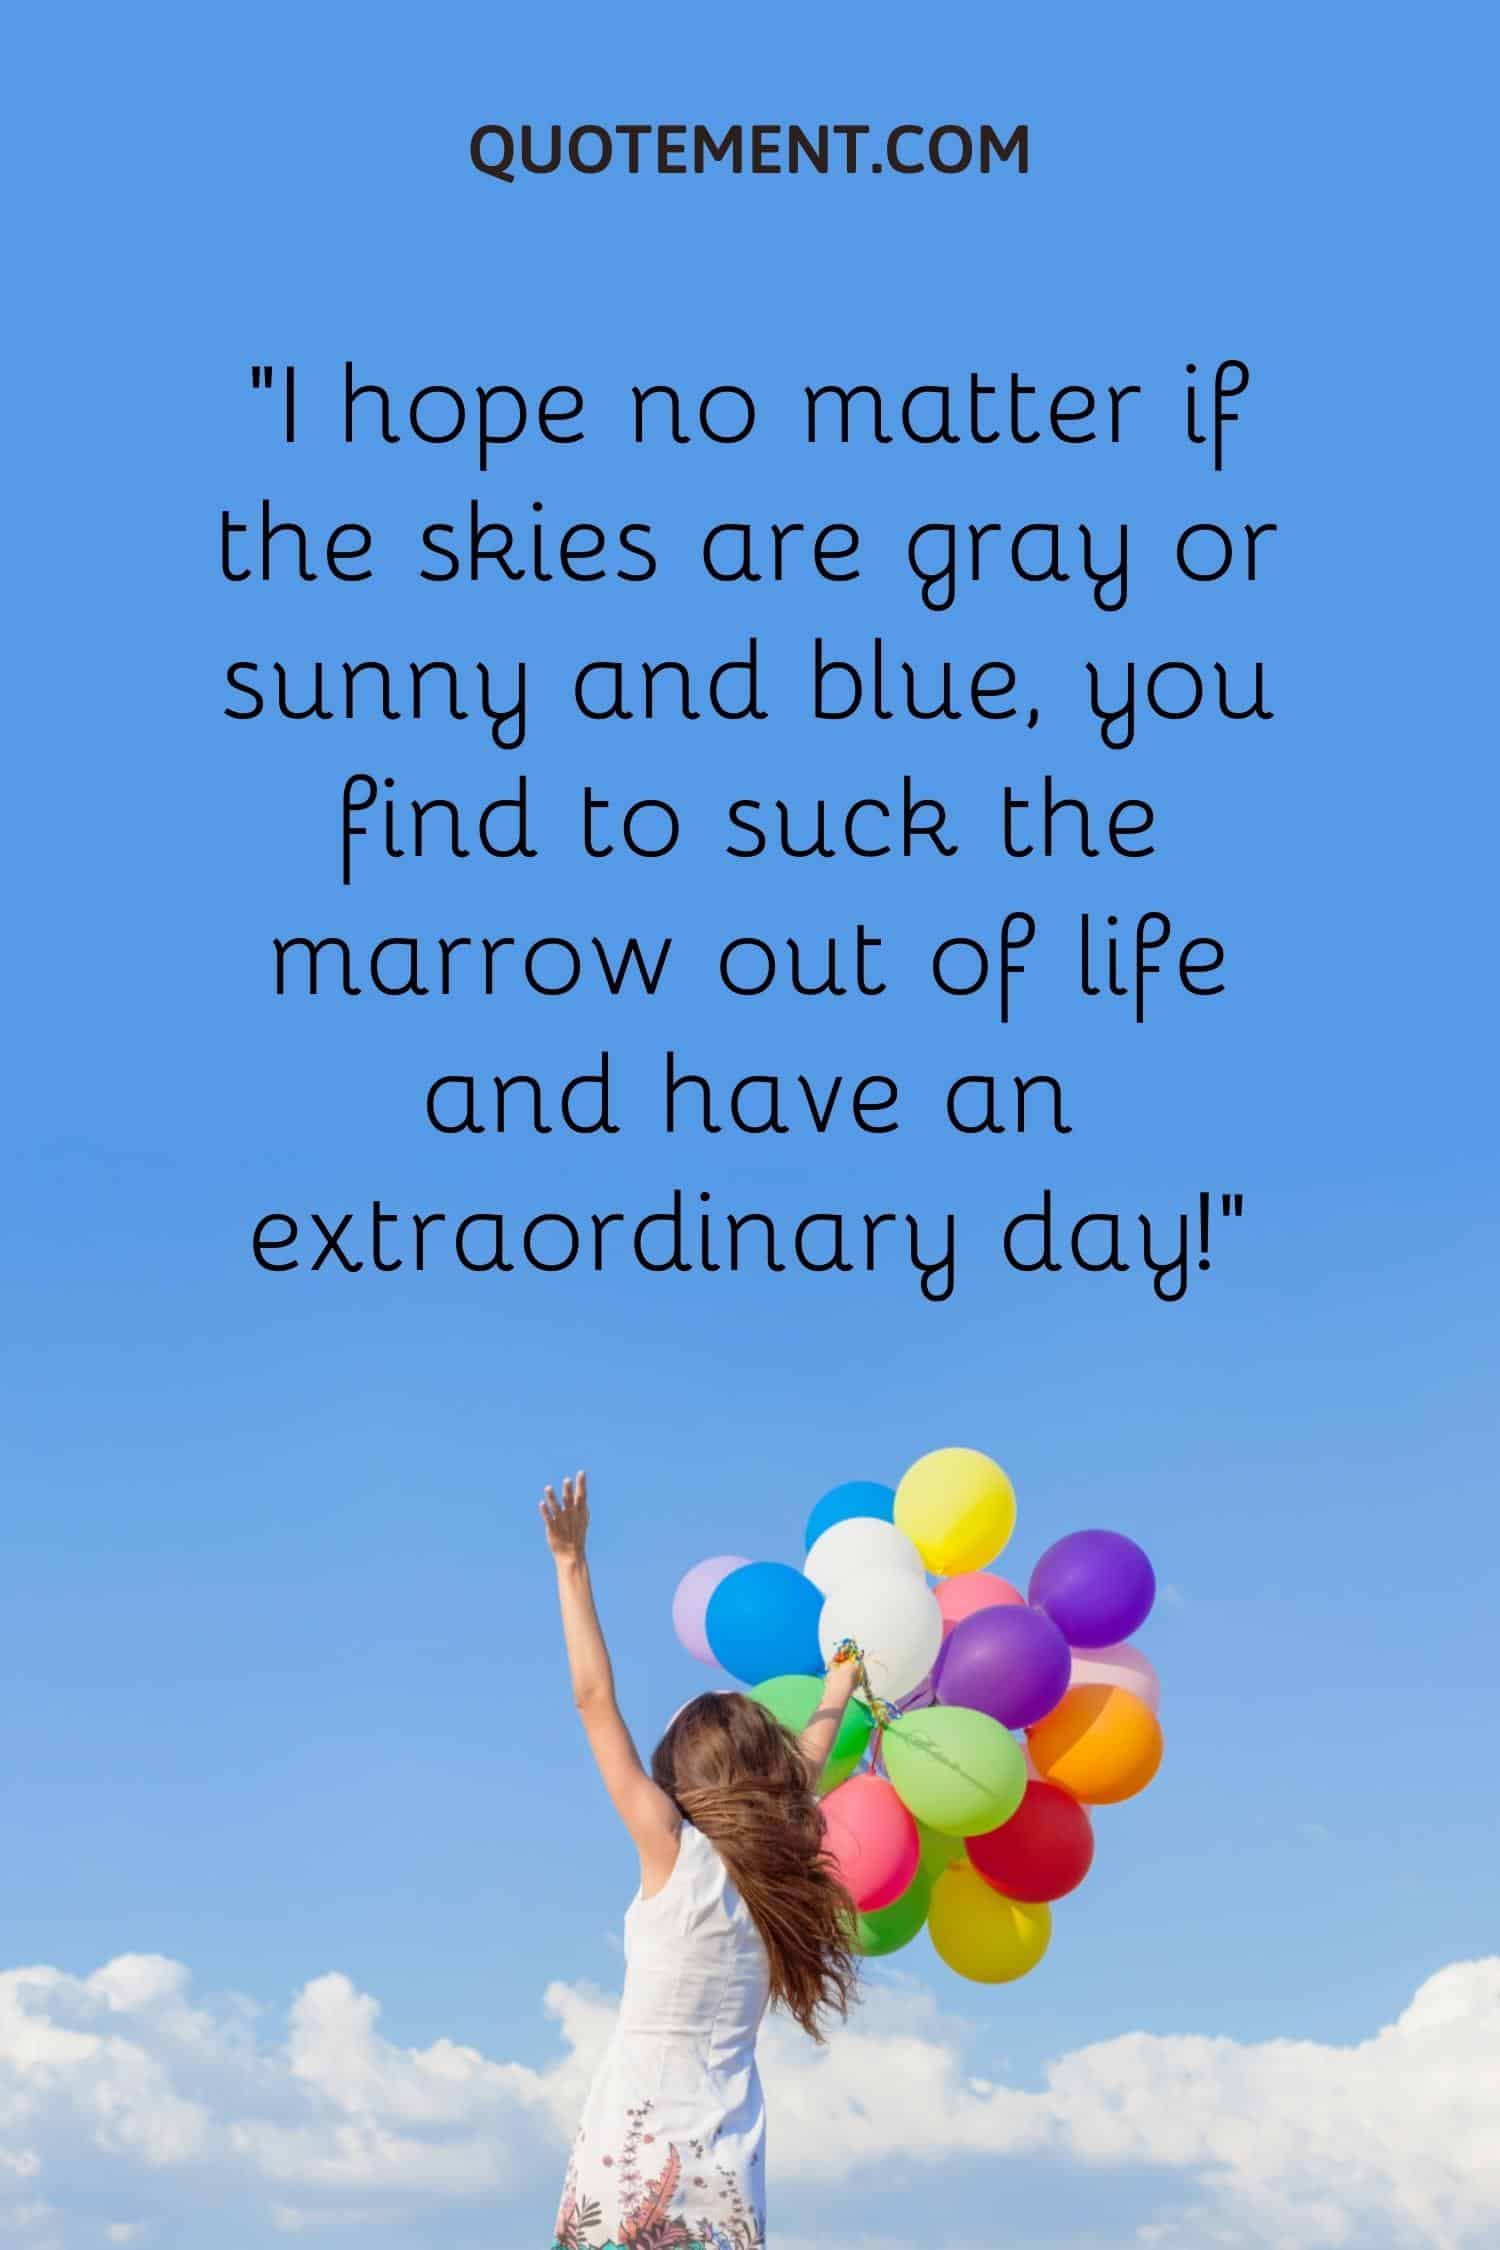 I hope no matter if the skies are gray or sunny and blue, you find to suck the marrow out of life and have an extraordinary day